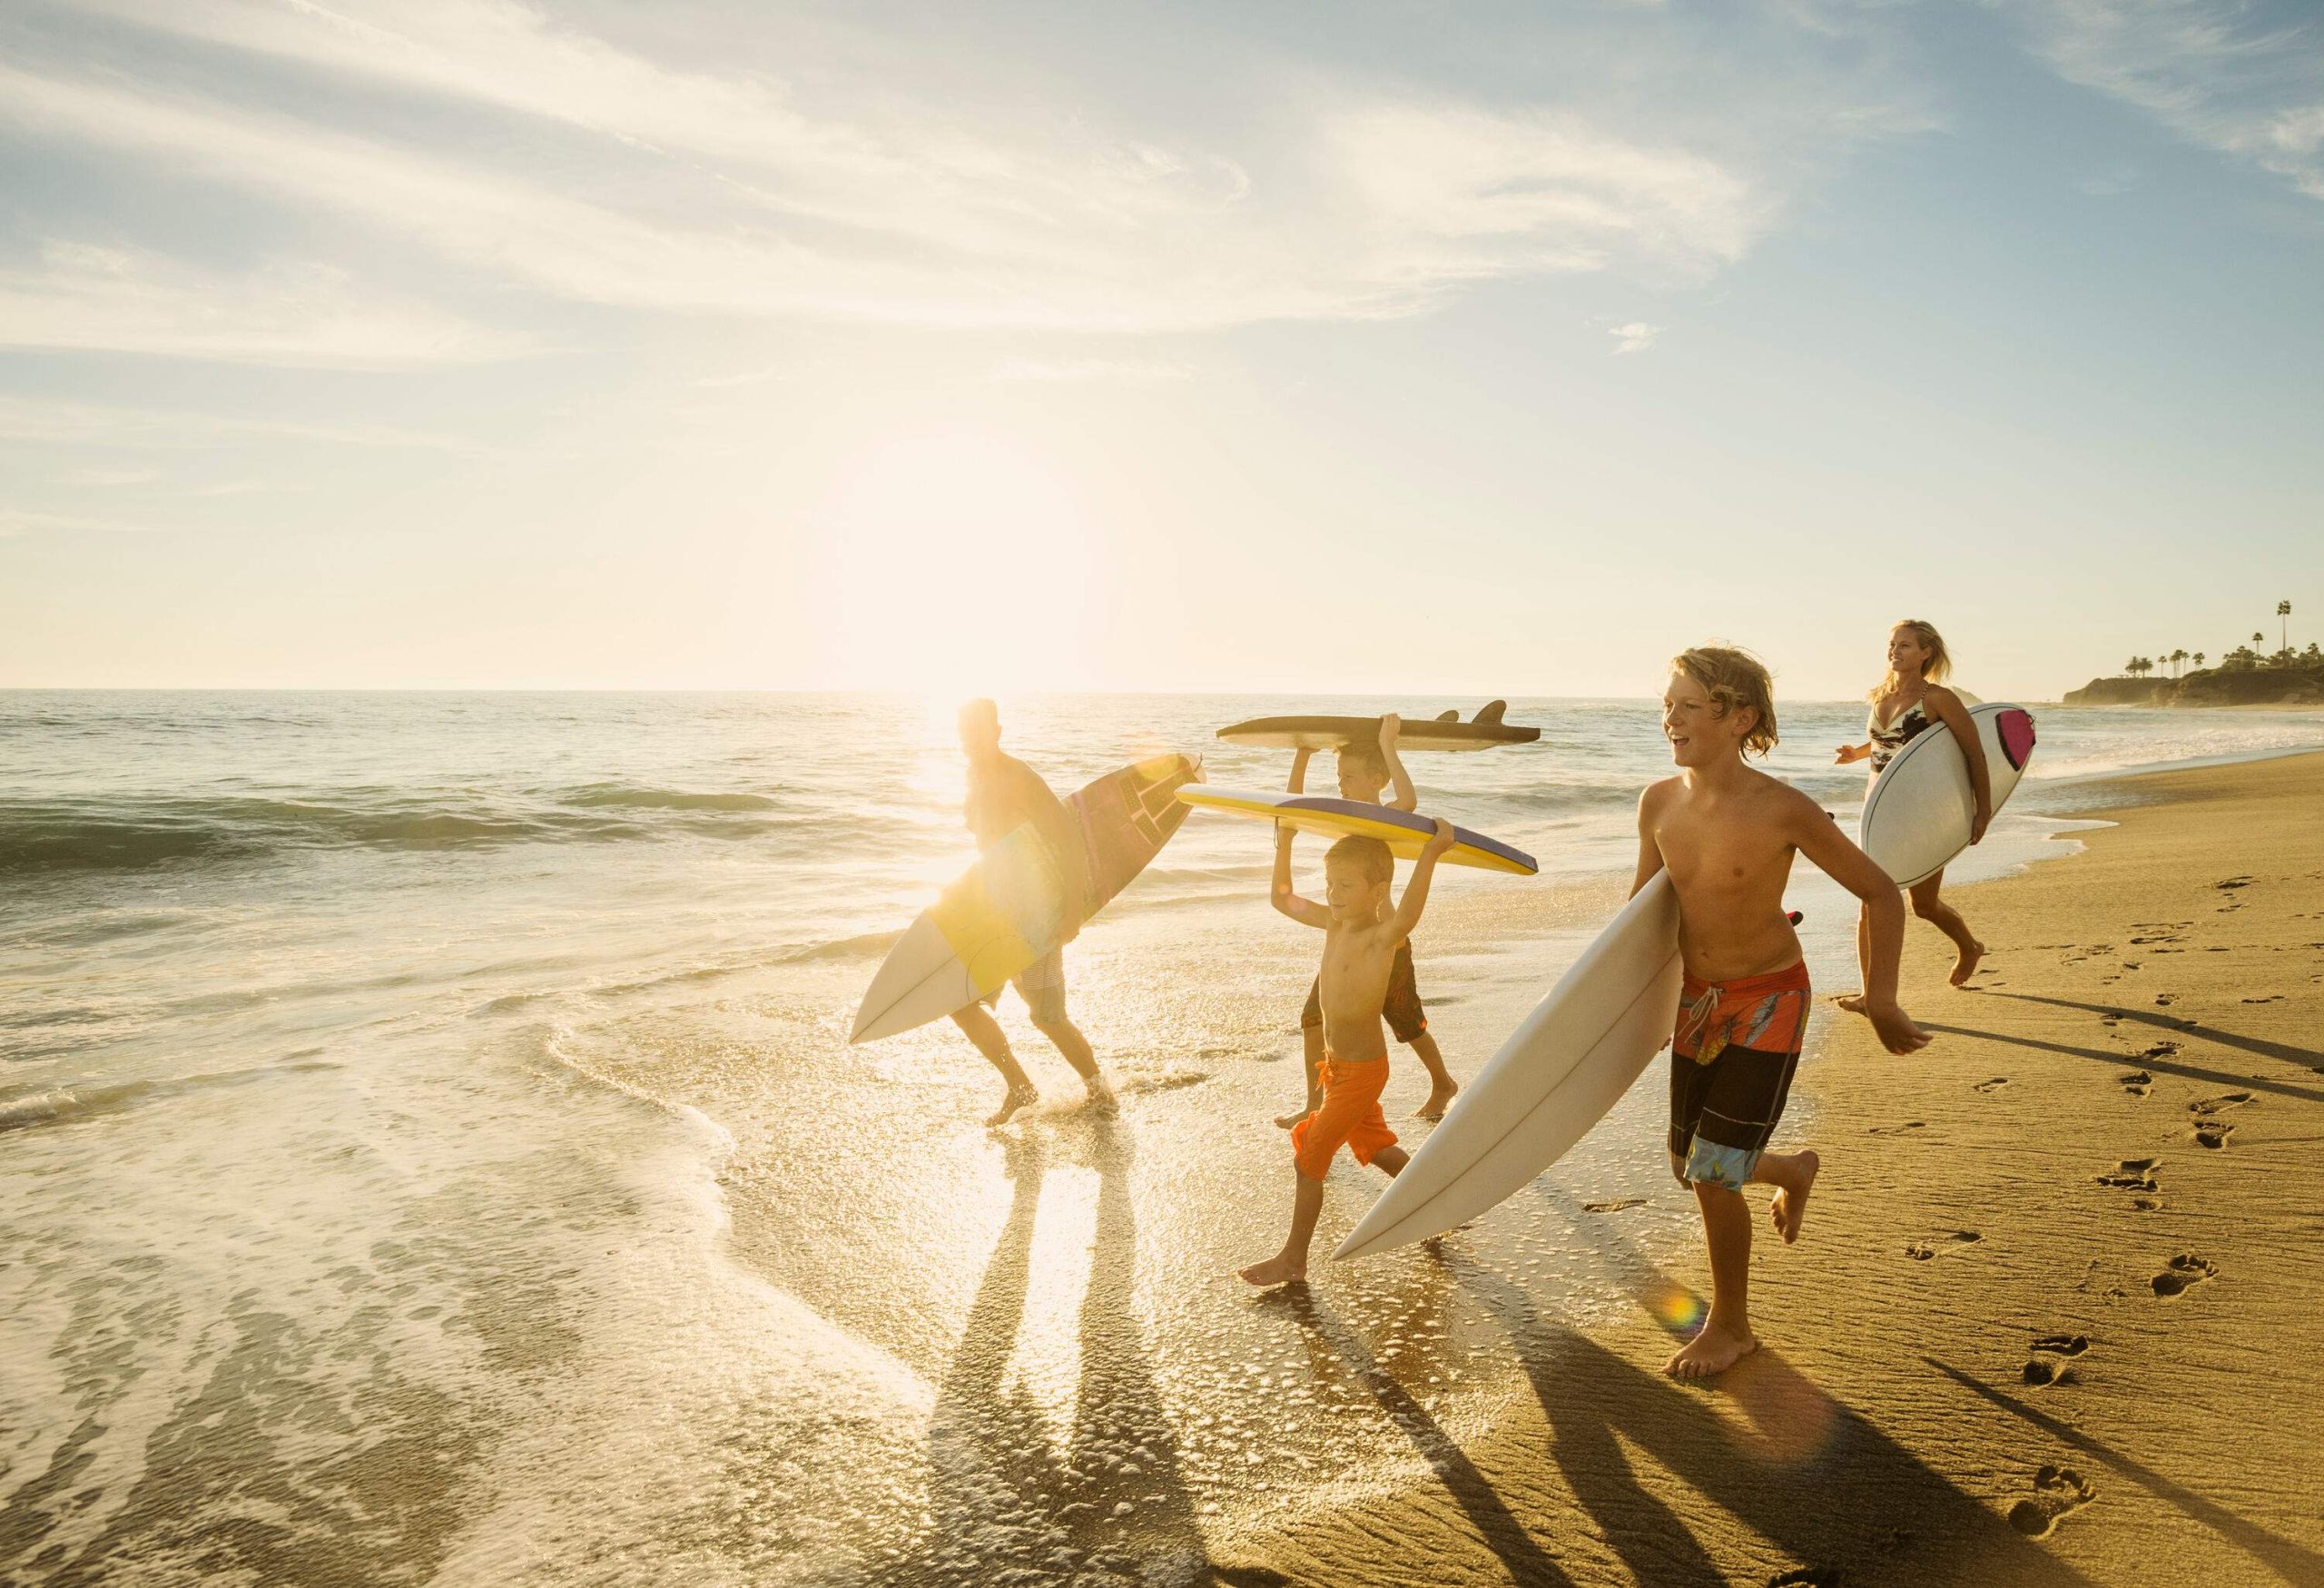 Family of surfers carrying surfboards along the beach